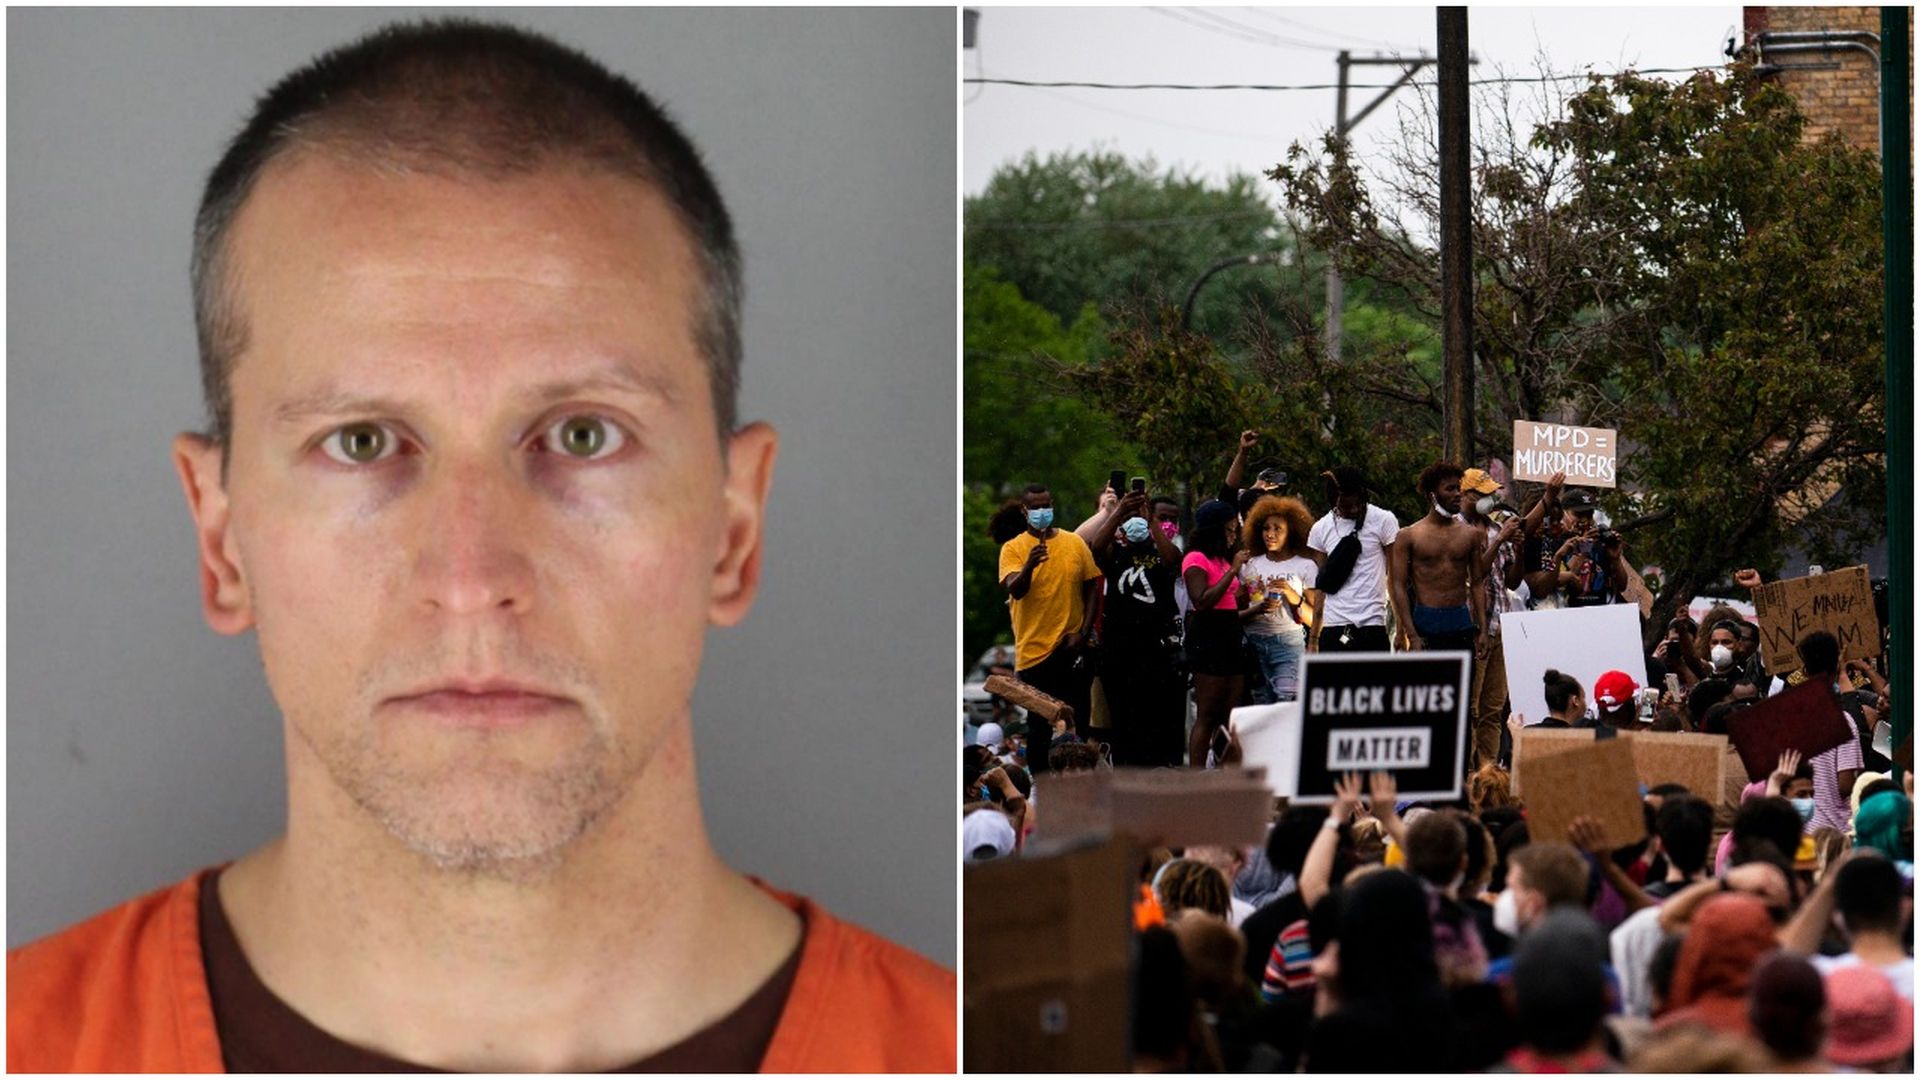 Mugshot of Derek Chauvin on the left and photo of a crowd holding up signs in support of Black Lives Matter at a protest